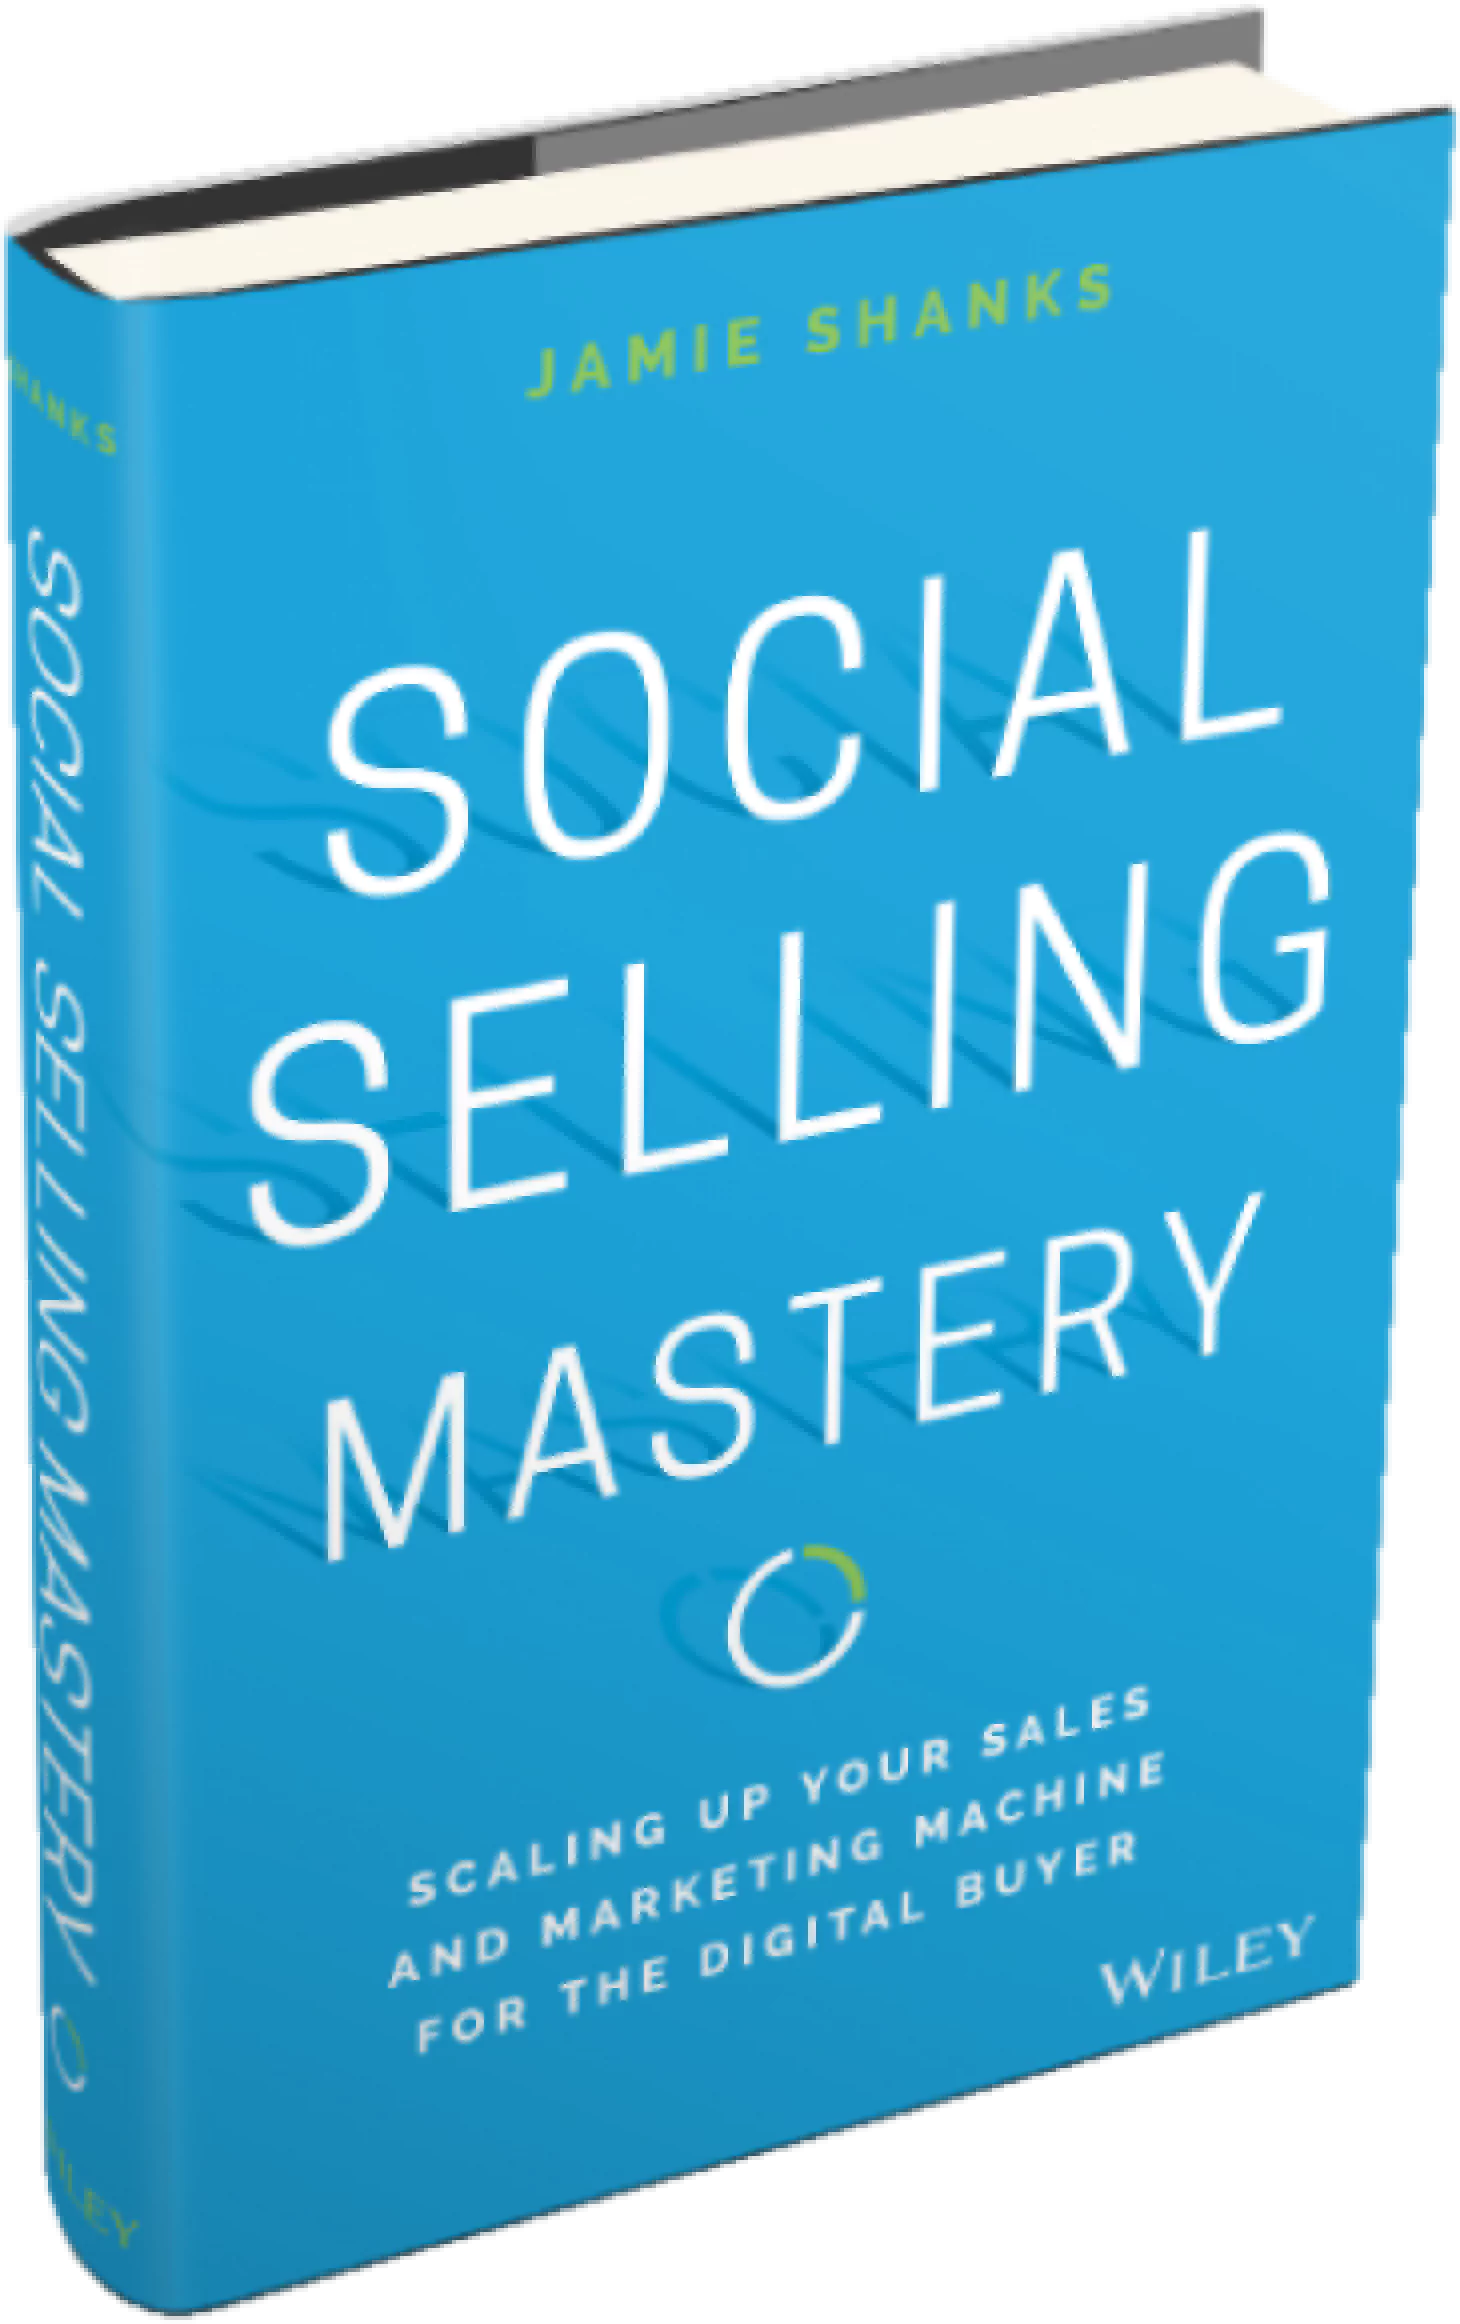 Social Selling Mastery book